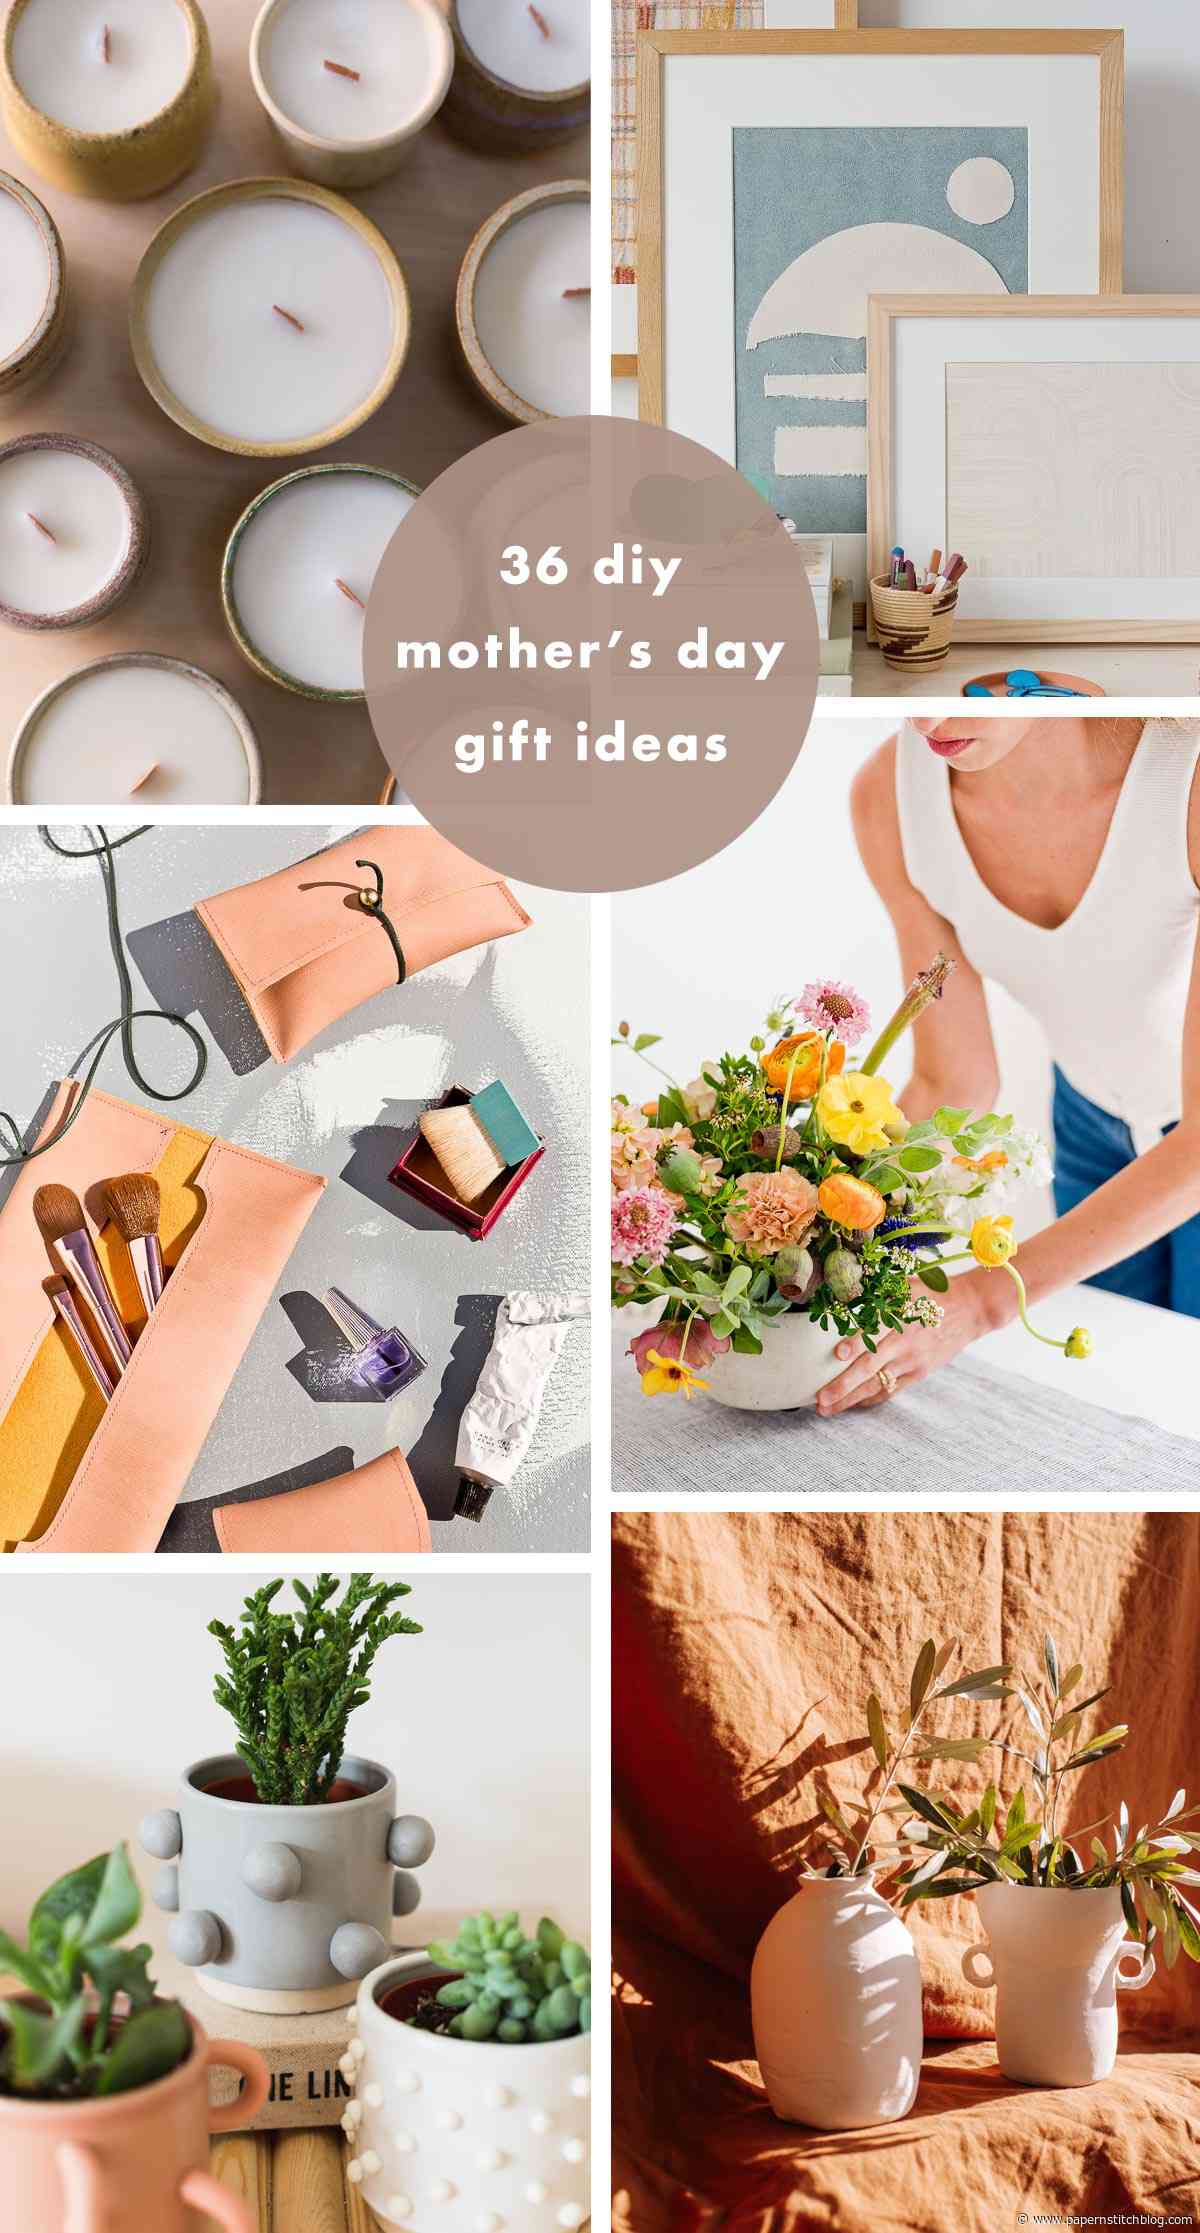 42 Unique DIY Mother’s Day Gifts